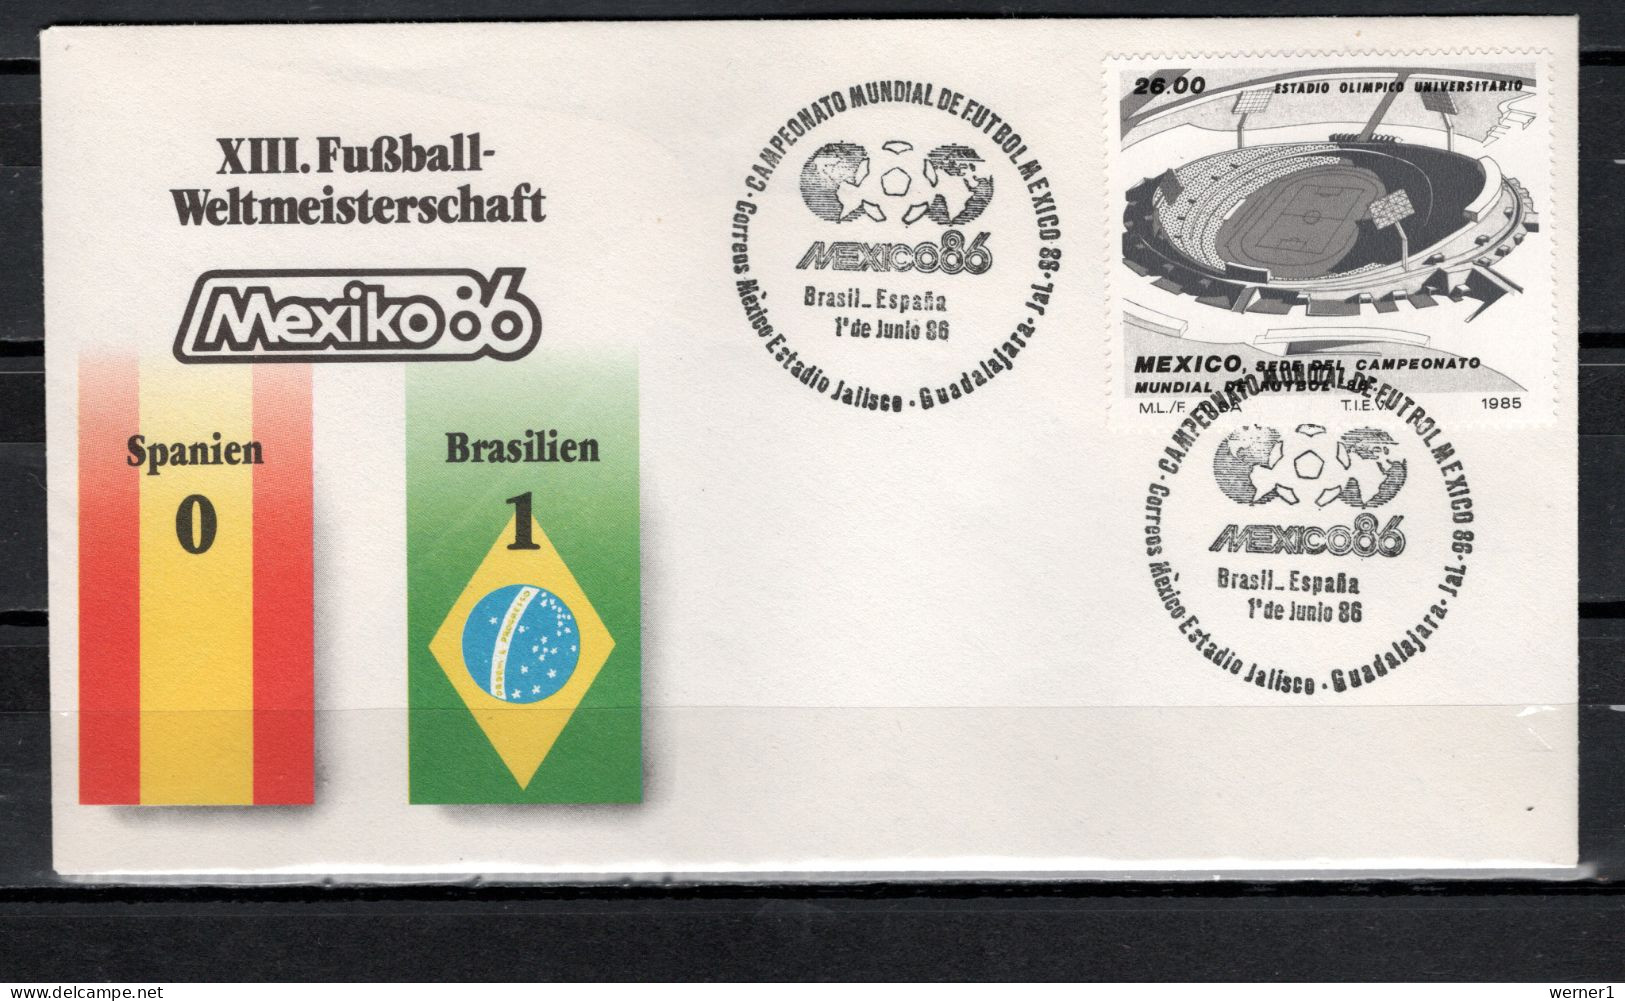 Mexico 1986 Football Soccer World Cup Commemorative Cover Match Spain - Brazil 0 : 1 - 1986 – Mexico